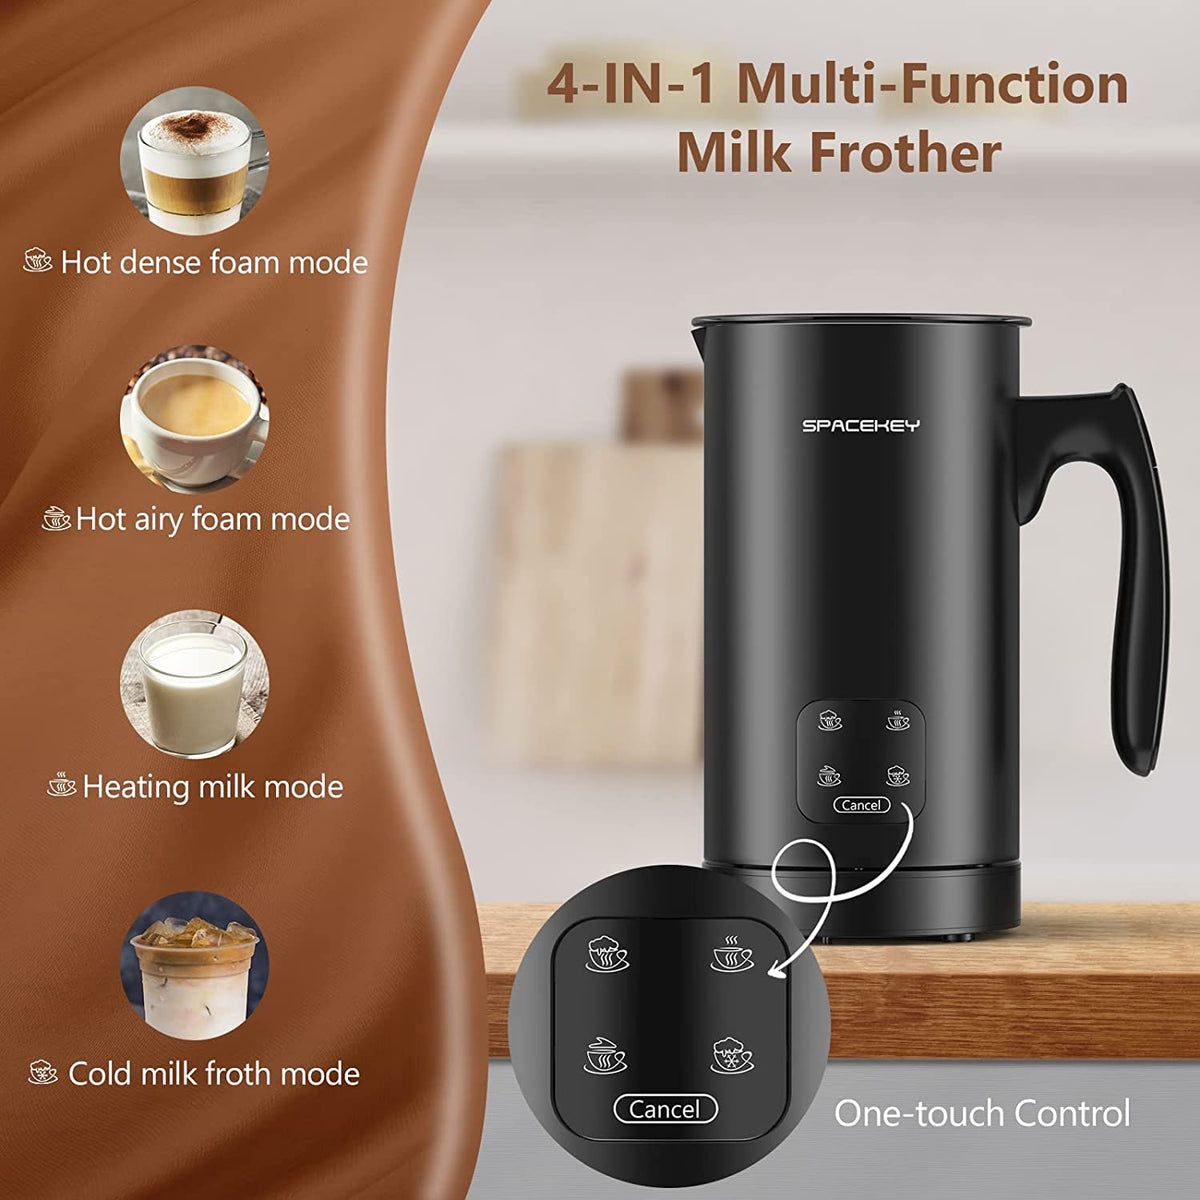 Wholesale Automatic Electric Milk Frother Multifunctional Milk Frother  Electric Steamer Handheld Milk Frother From m.